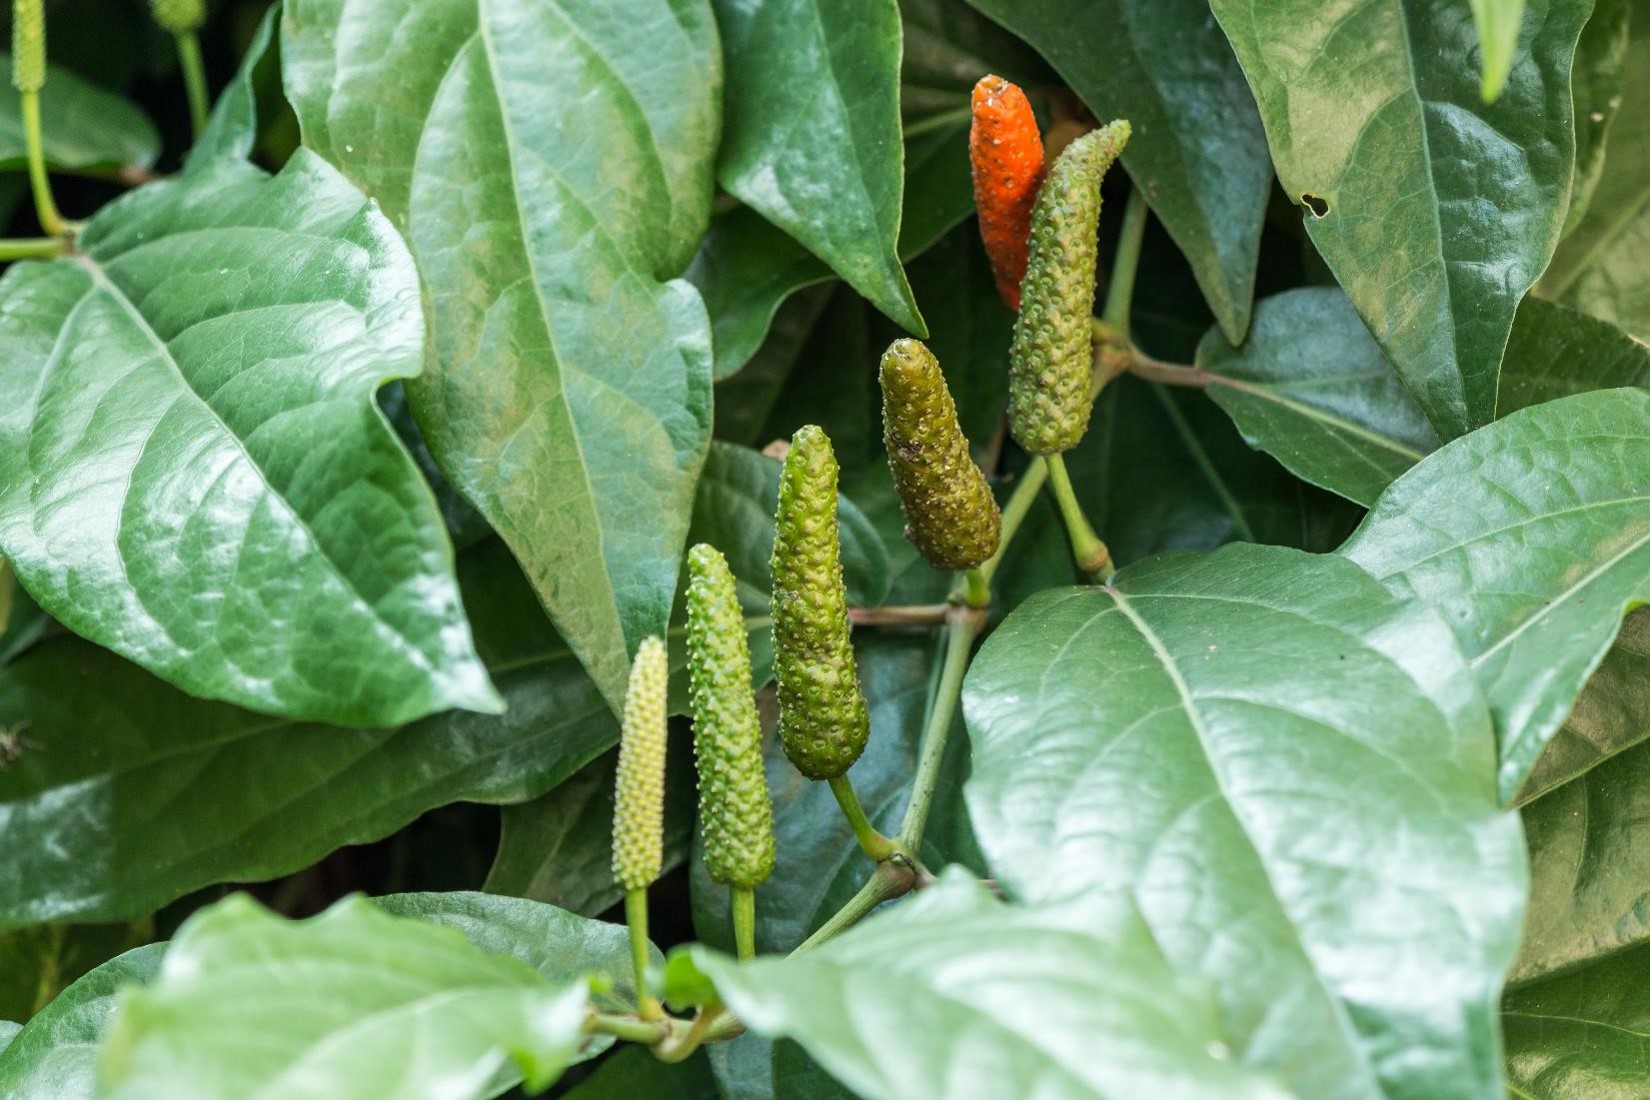 FIND OUT MORE ABOUT LONG PEPPER